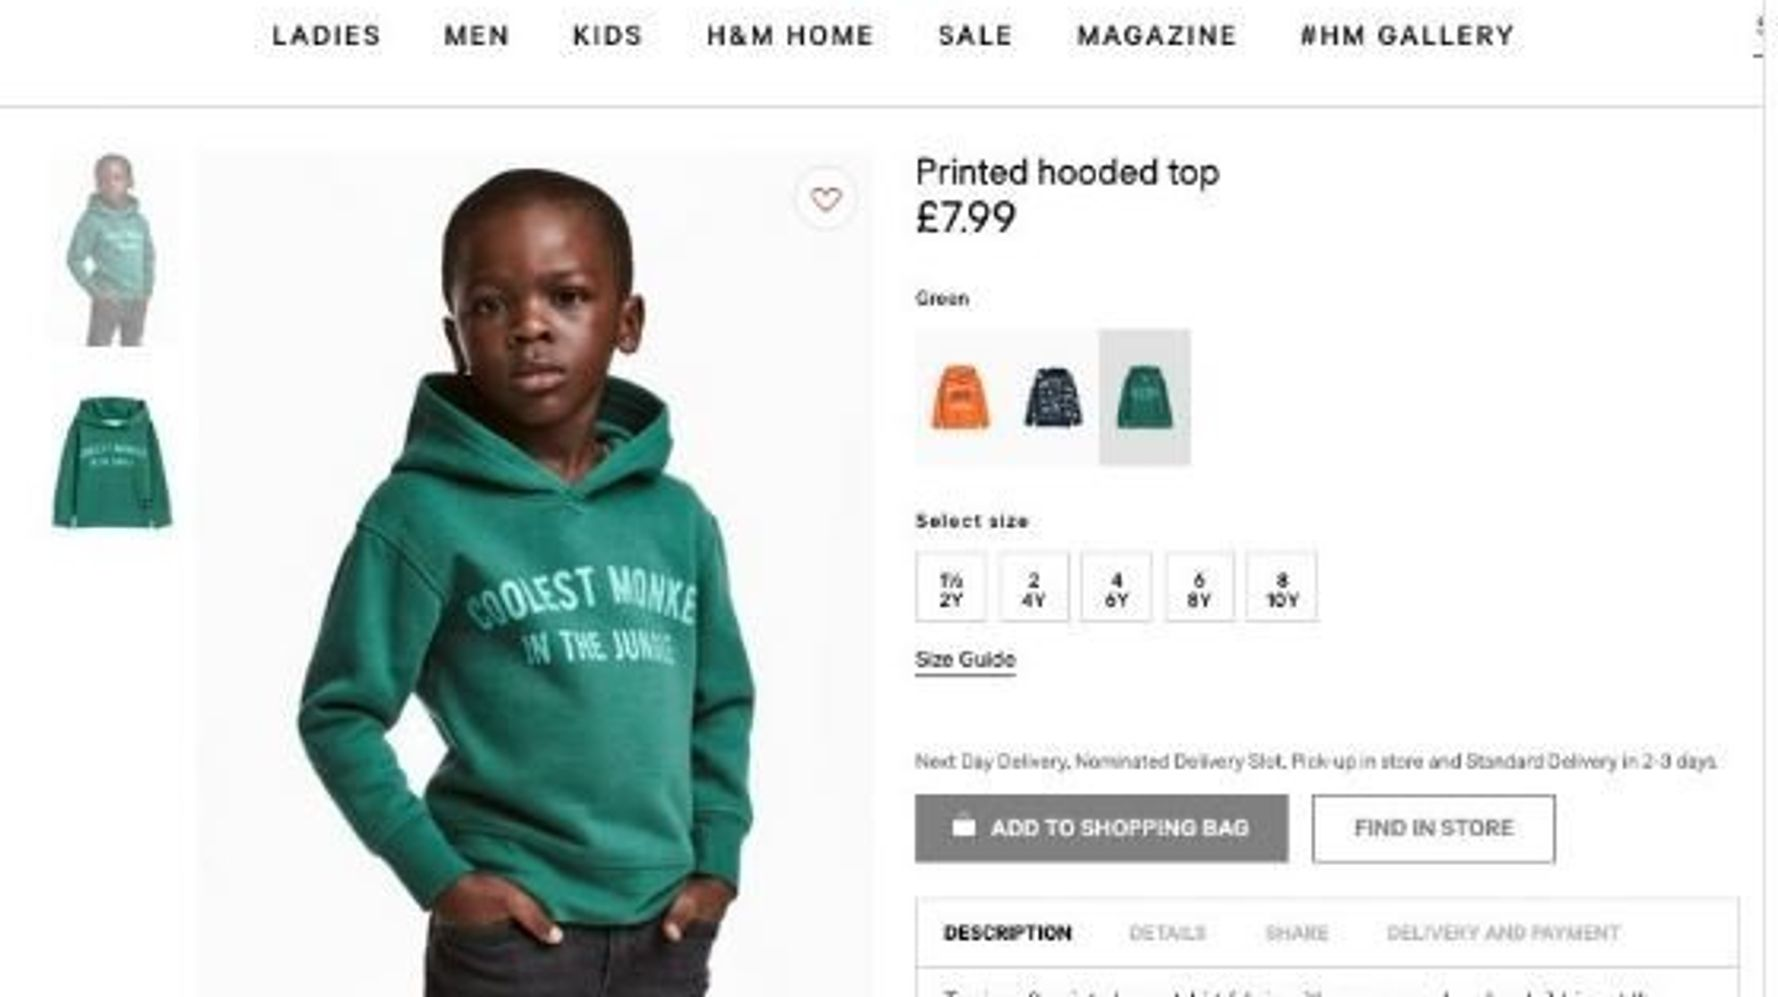 The sweatshirt in question on the H&M website